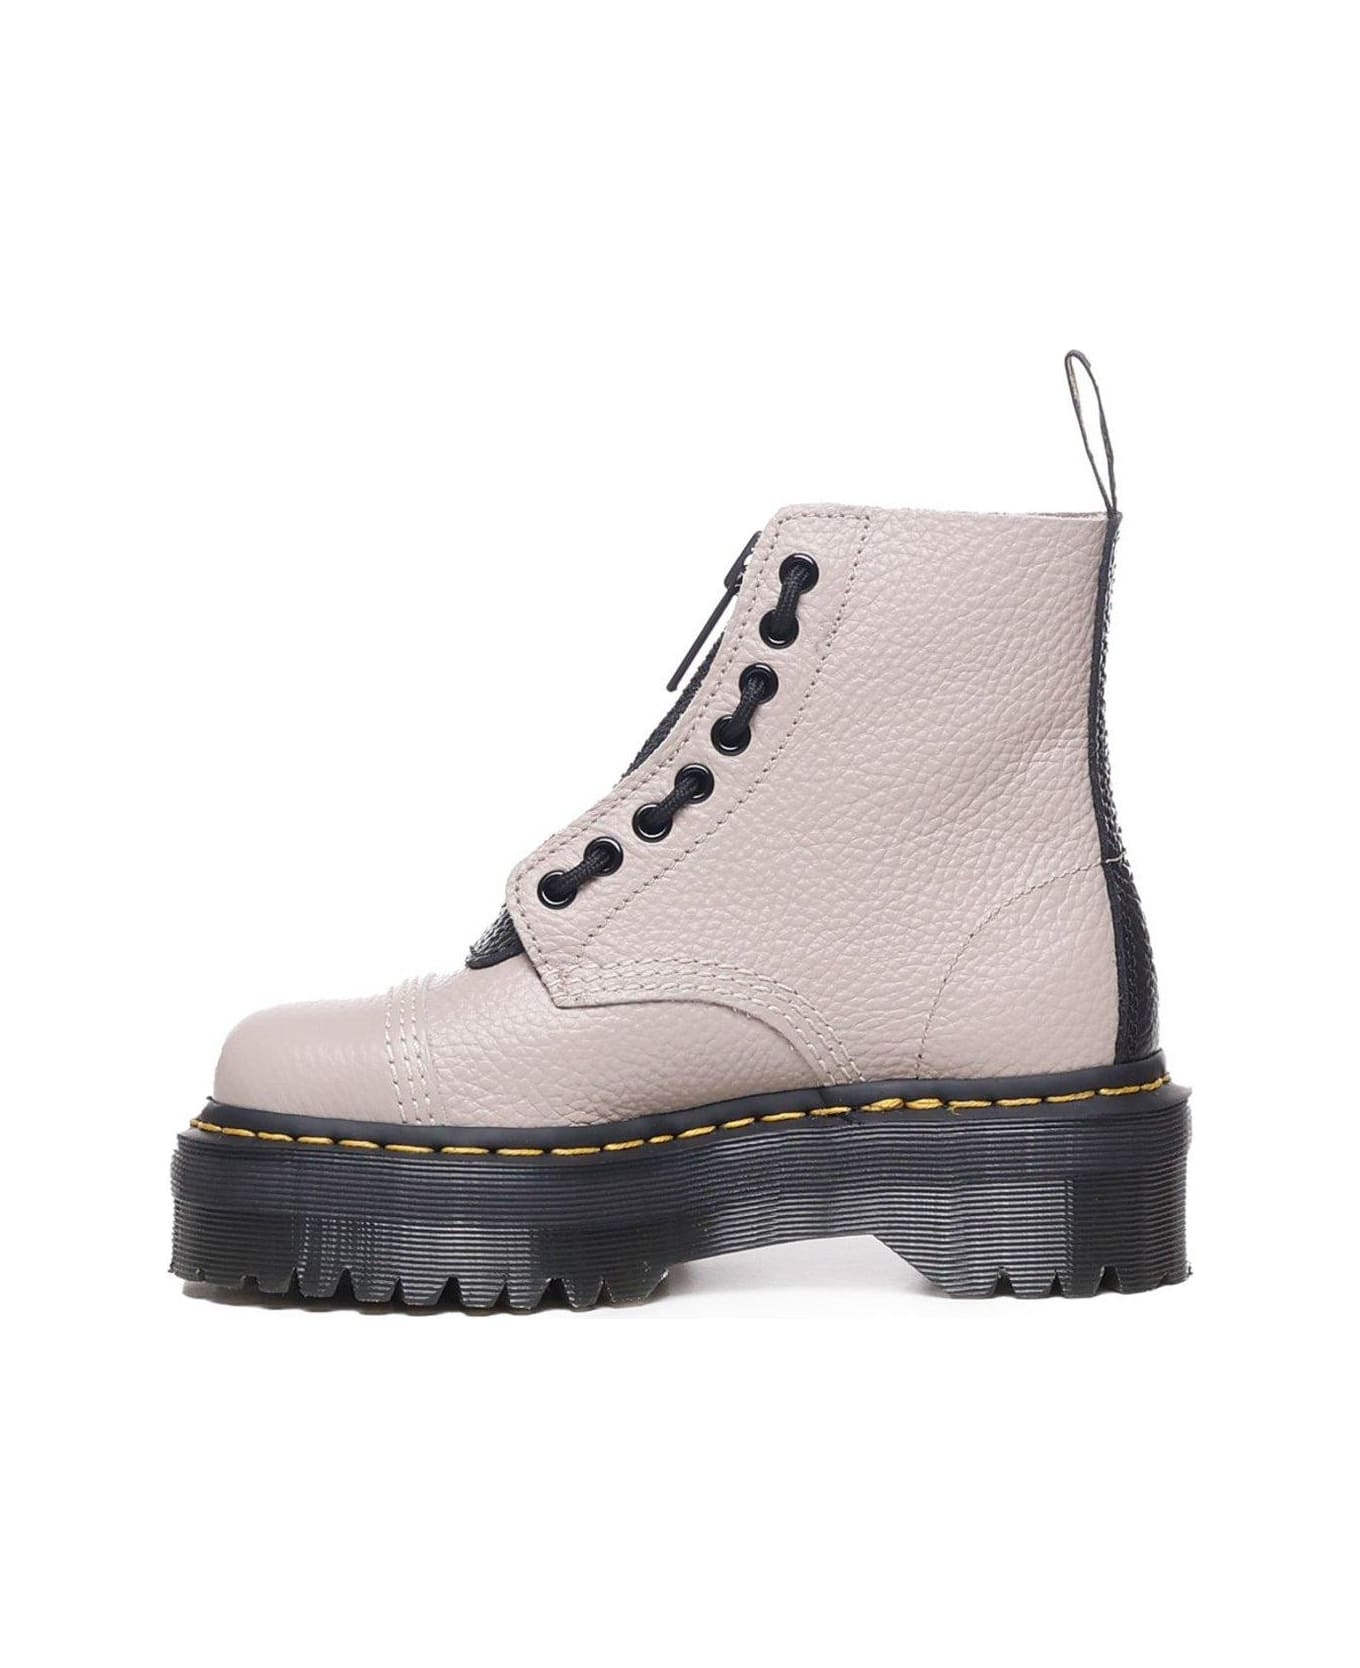 Dr. Martens Sinclair Combat Boots - taupe ブーツ